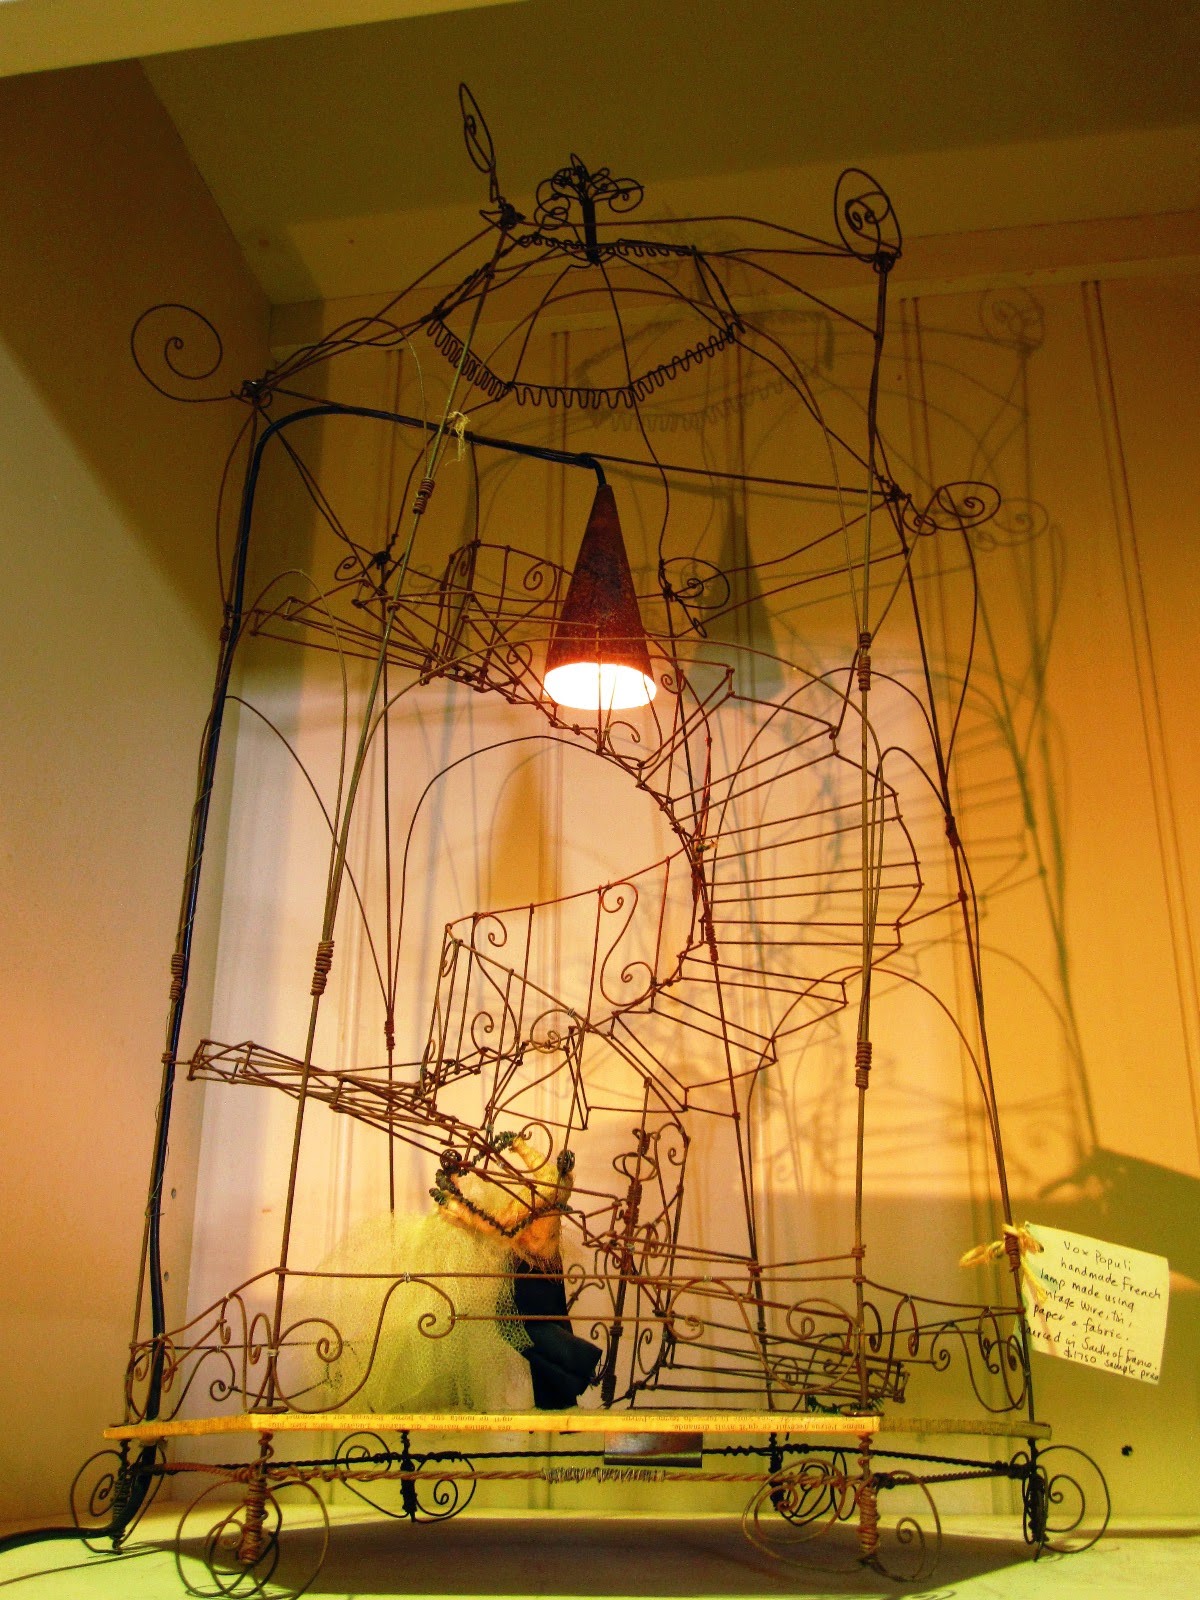 Vintage wire birdcage-shaped sculpture with wire spiral staircase and fabric doll, used as the basis for a lamp.